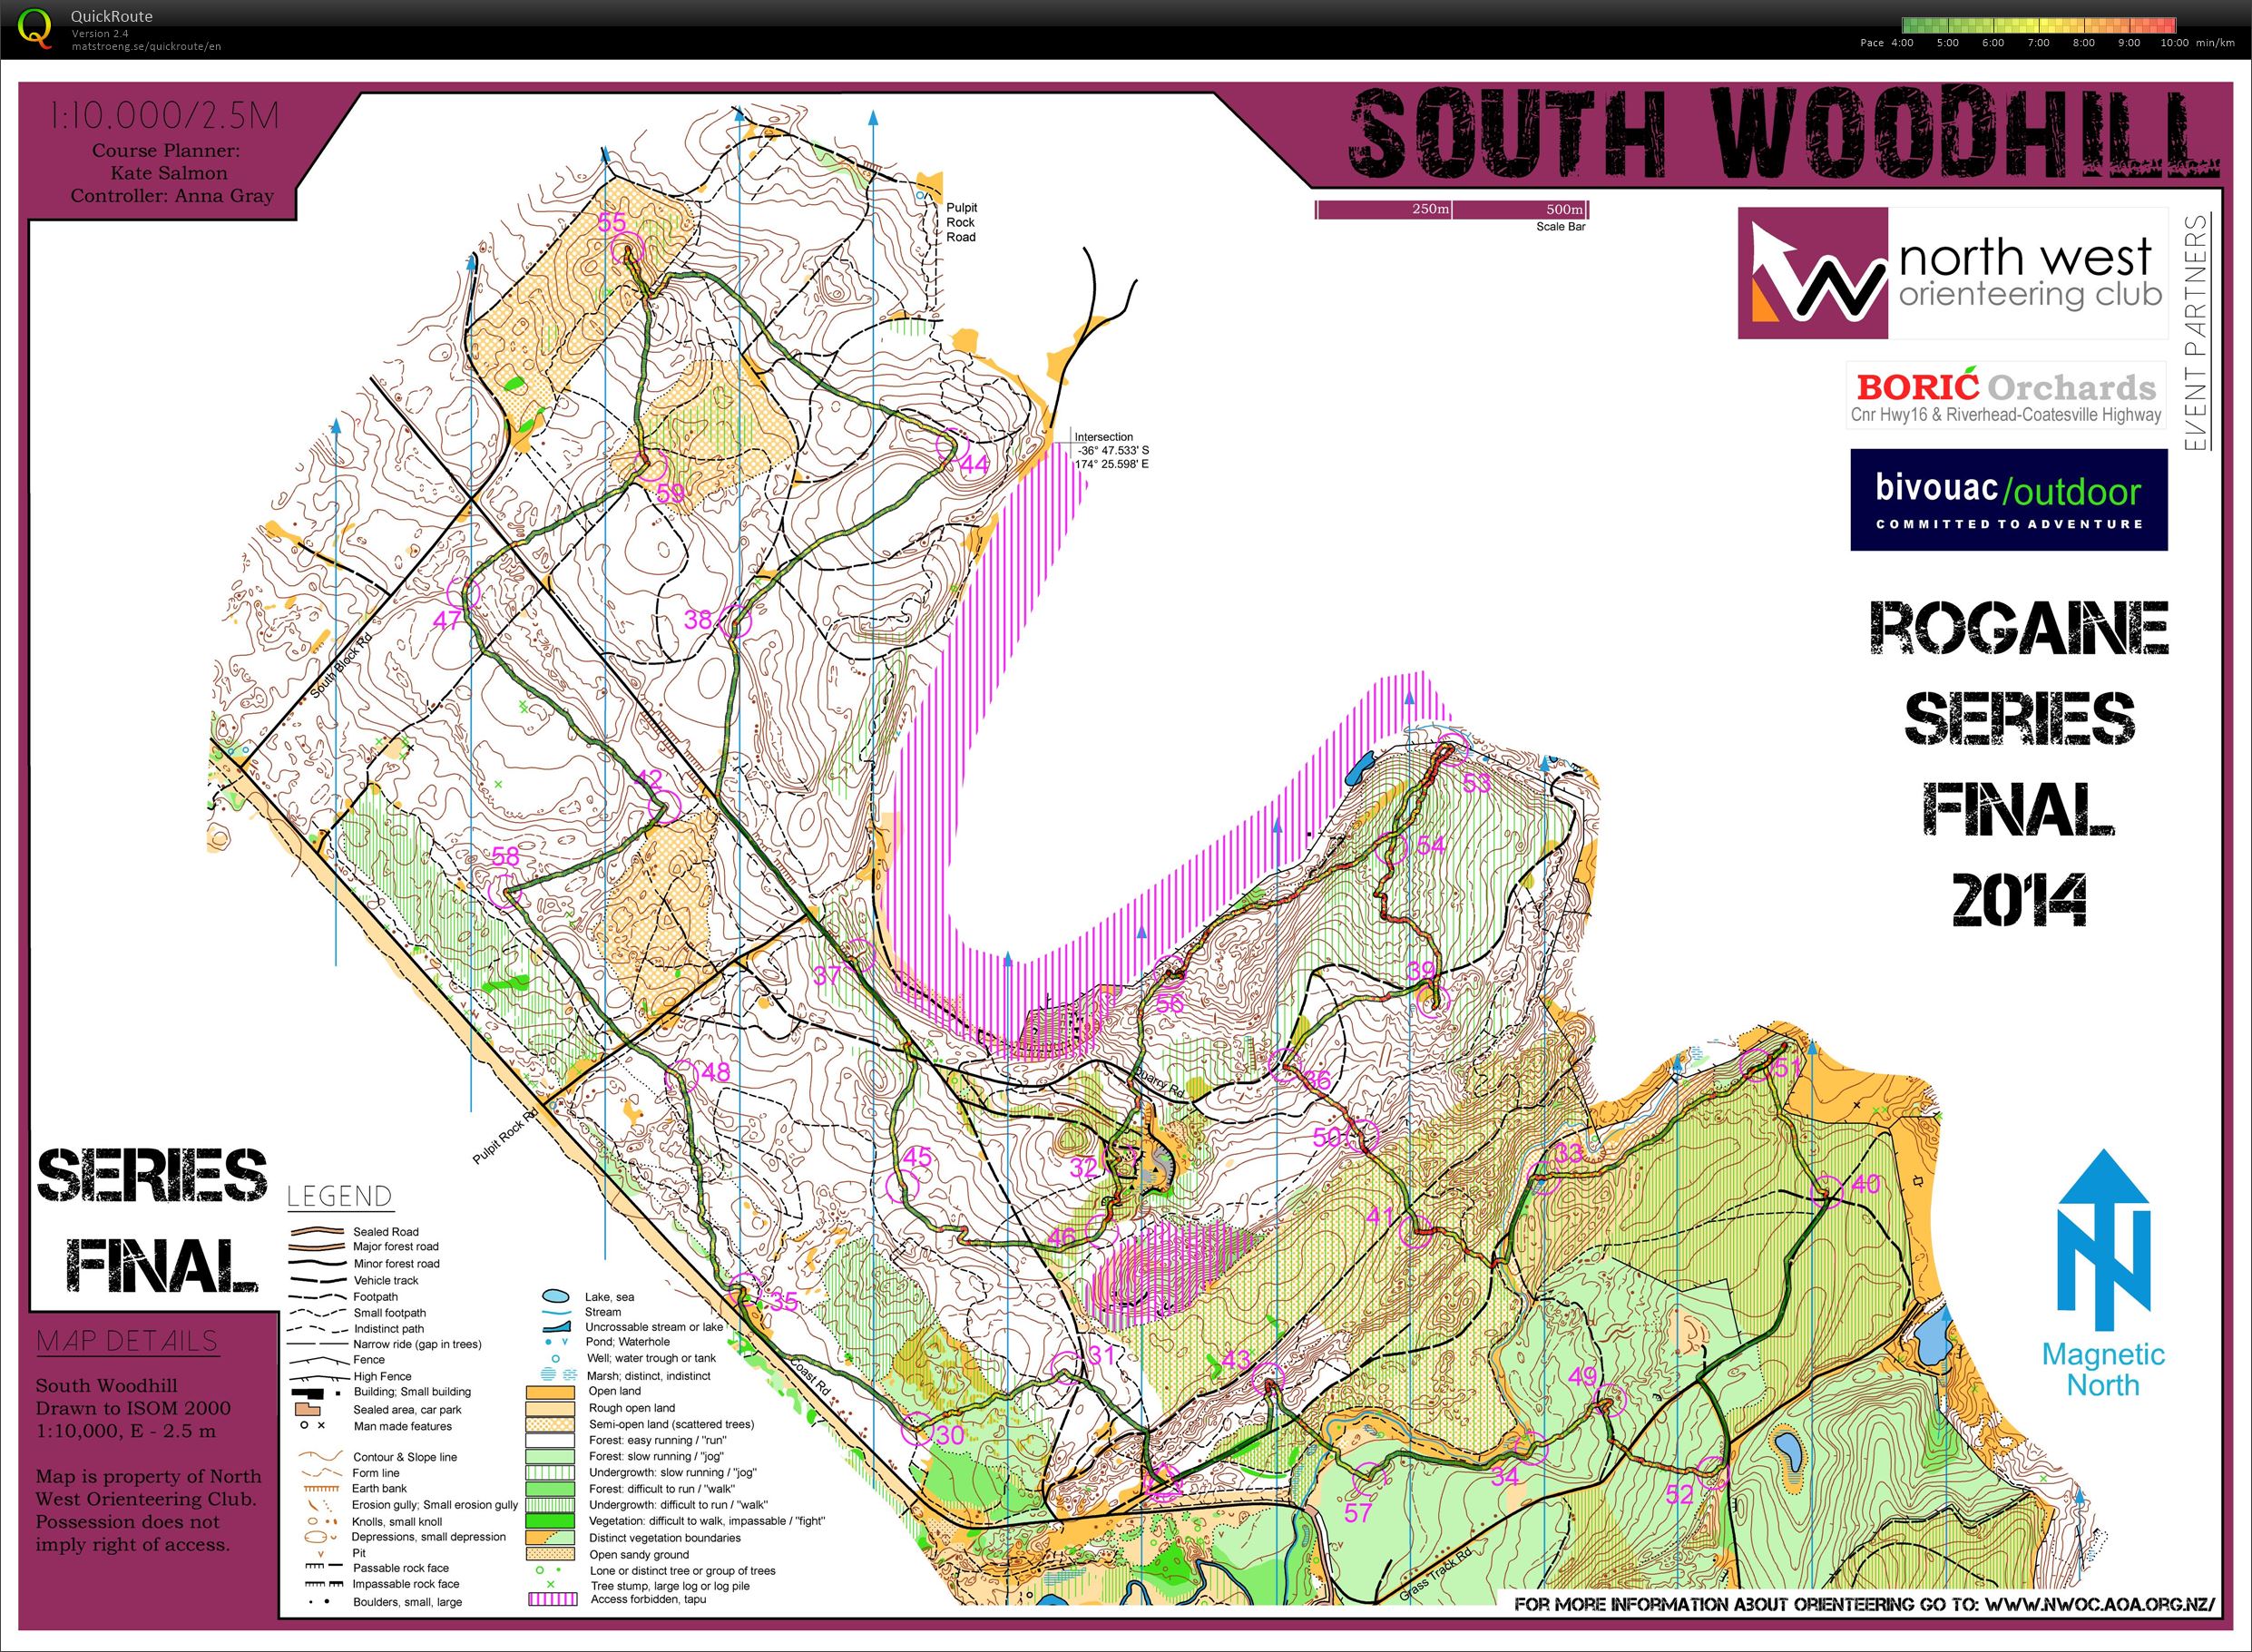 Rogaine Series - Part 4 - South Woodhill (08-06-2014)